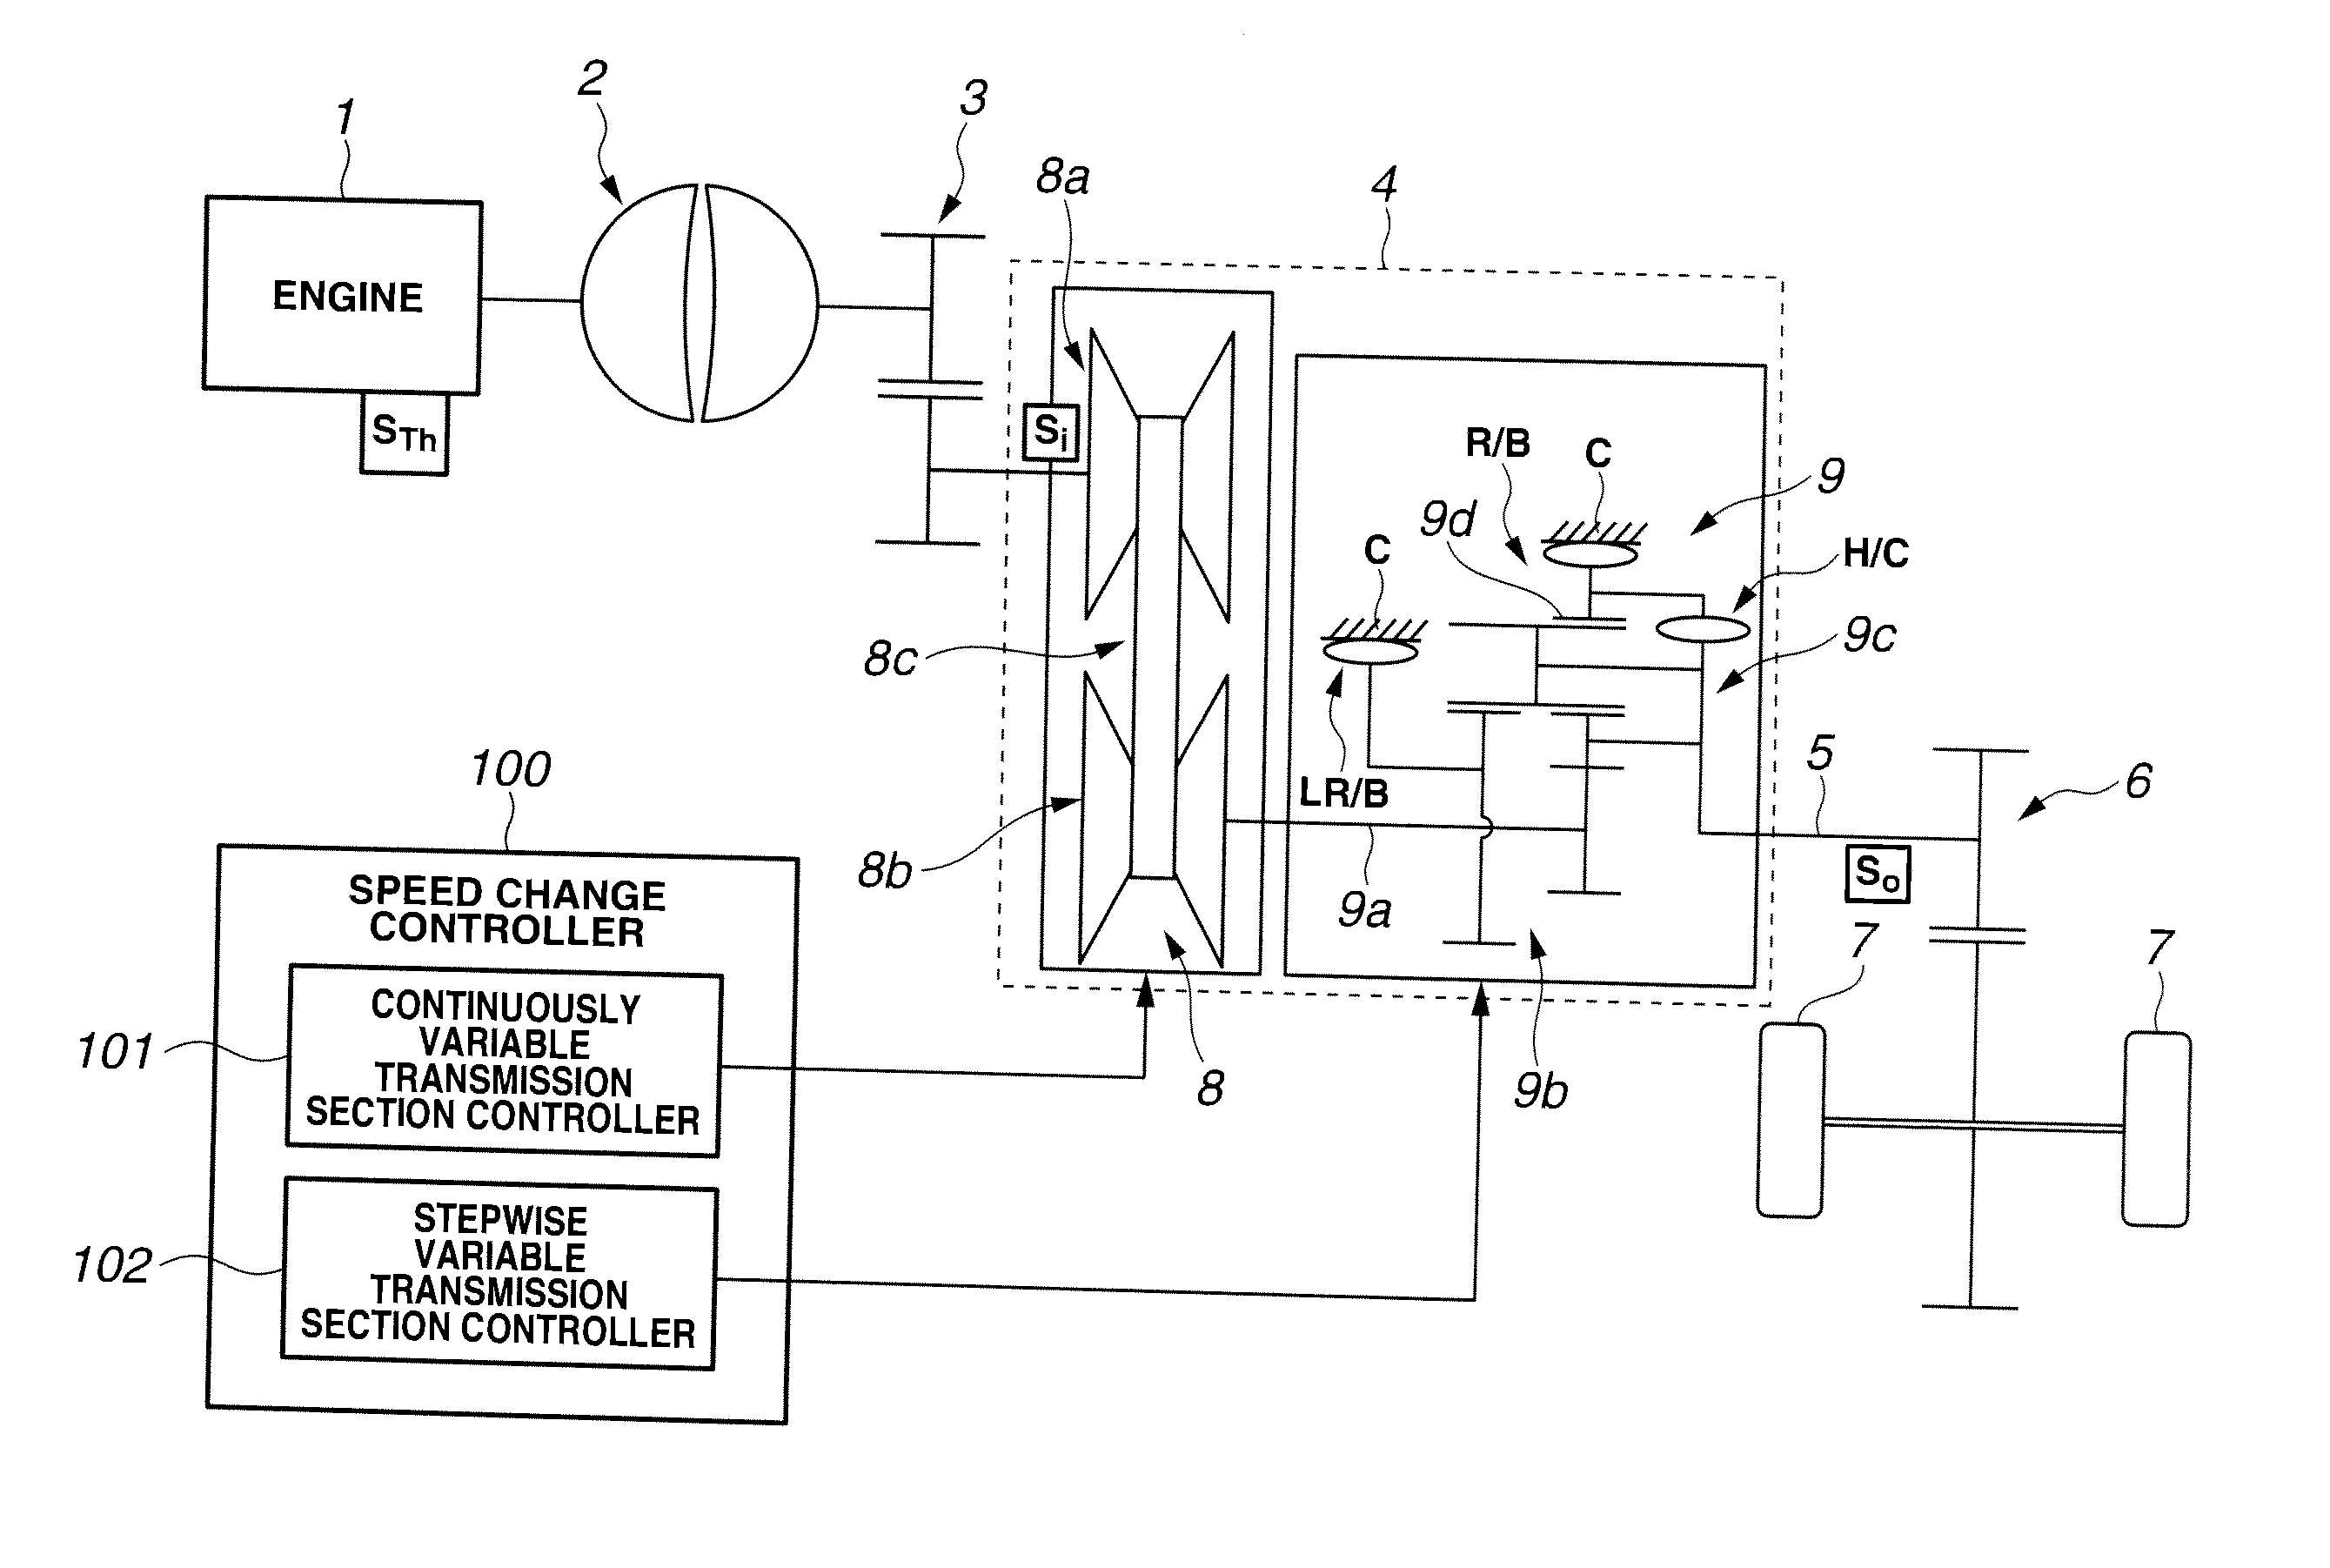 Control system of automatic transmission